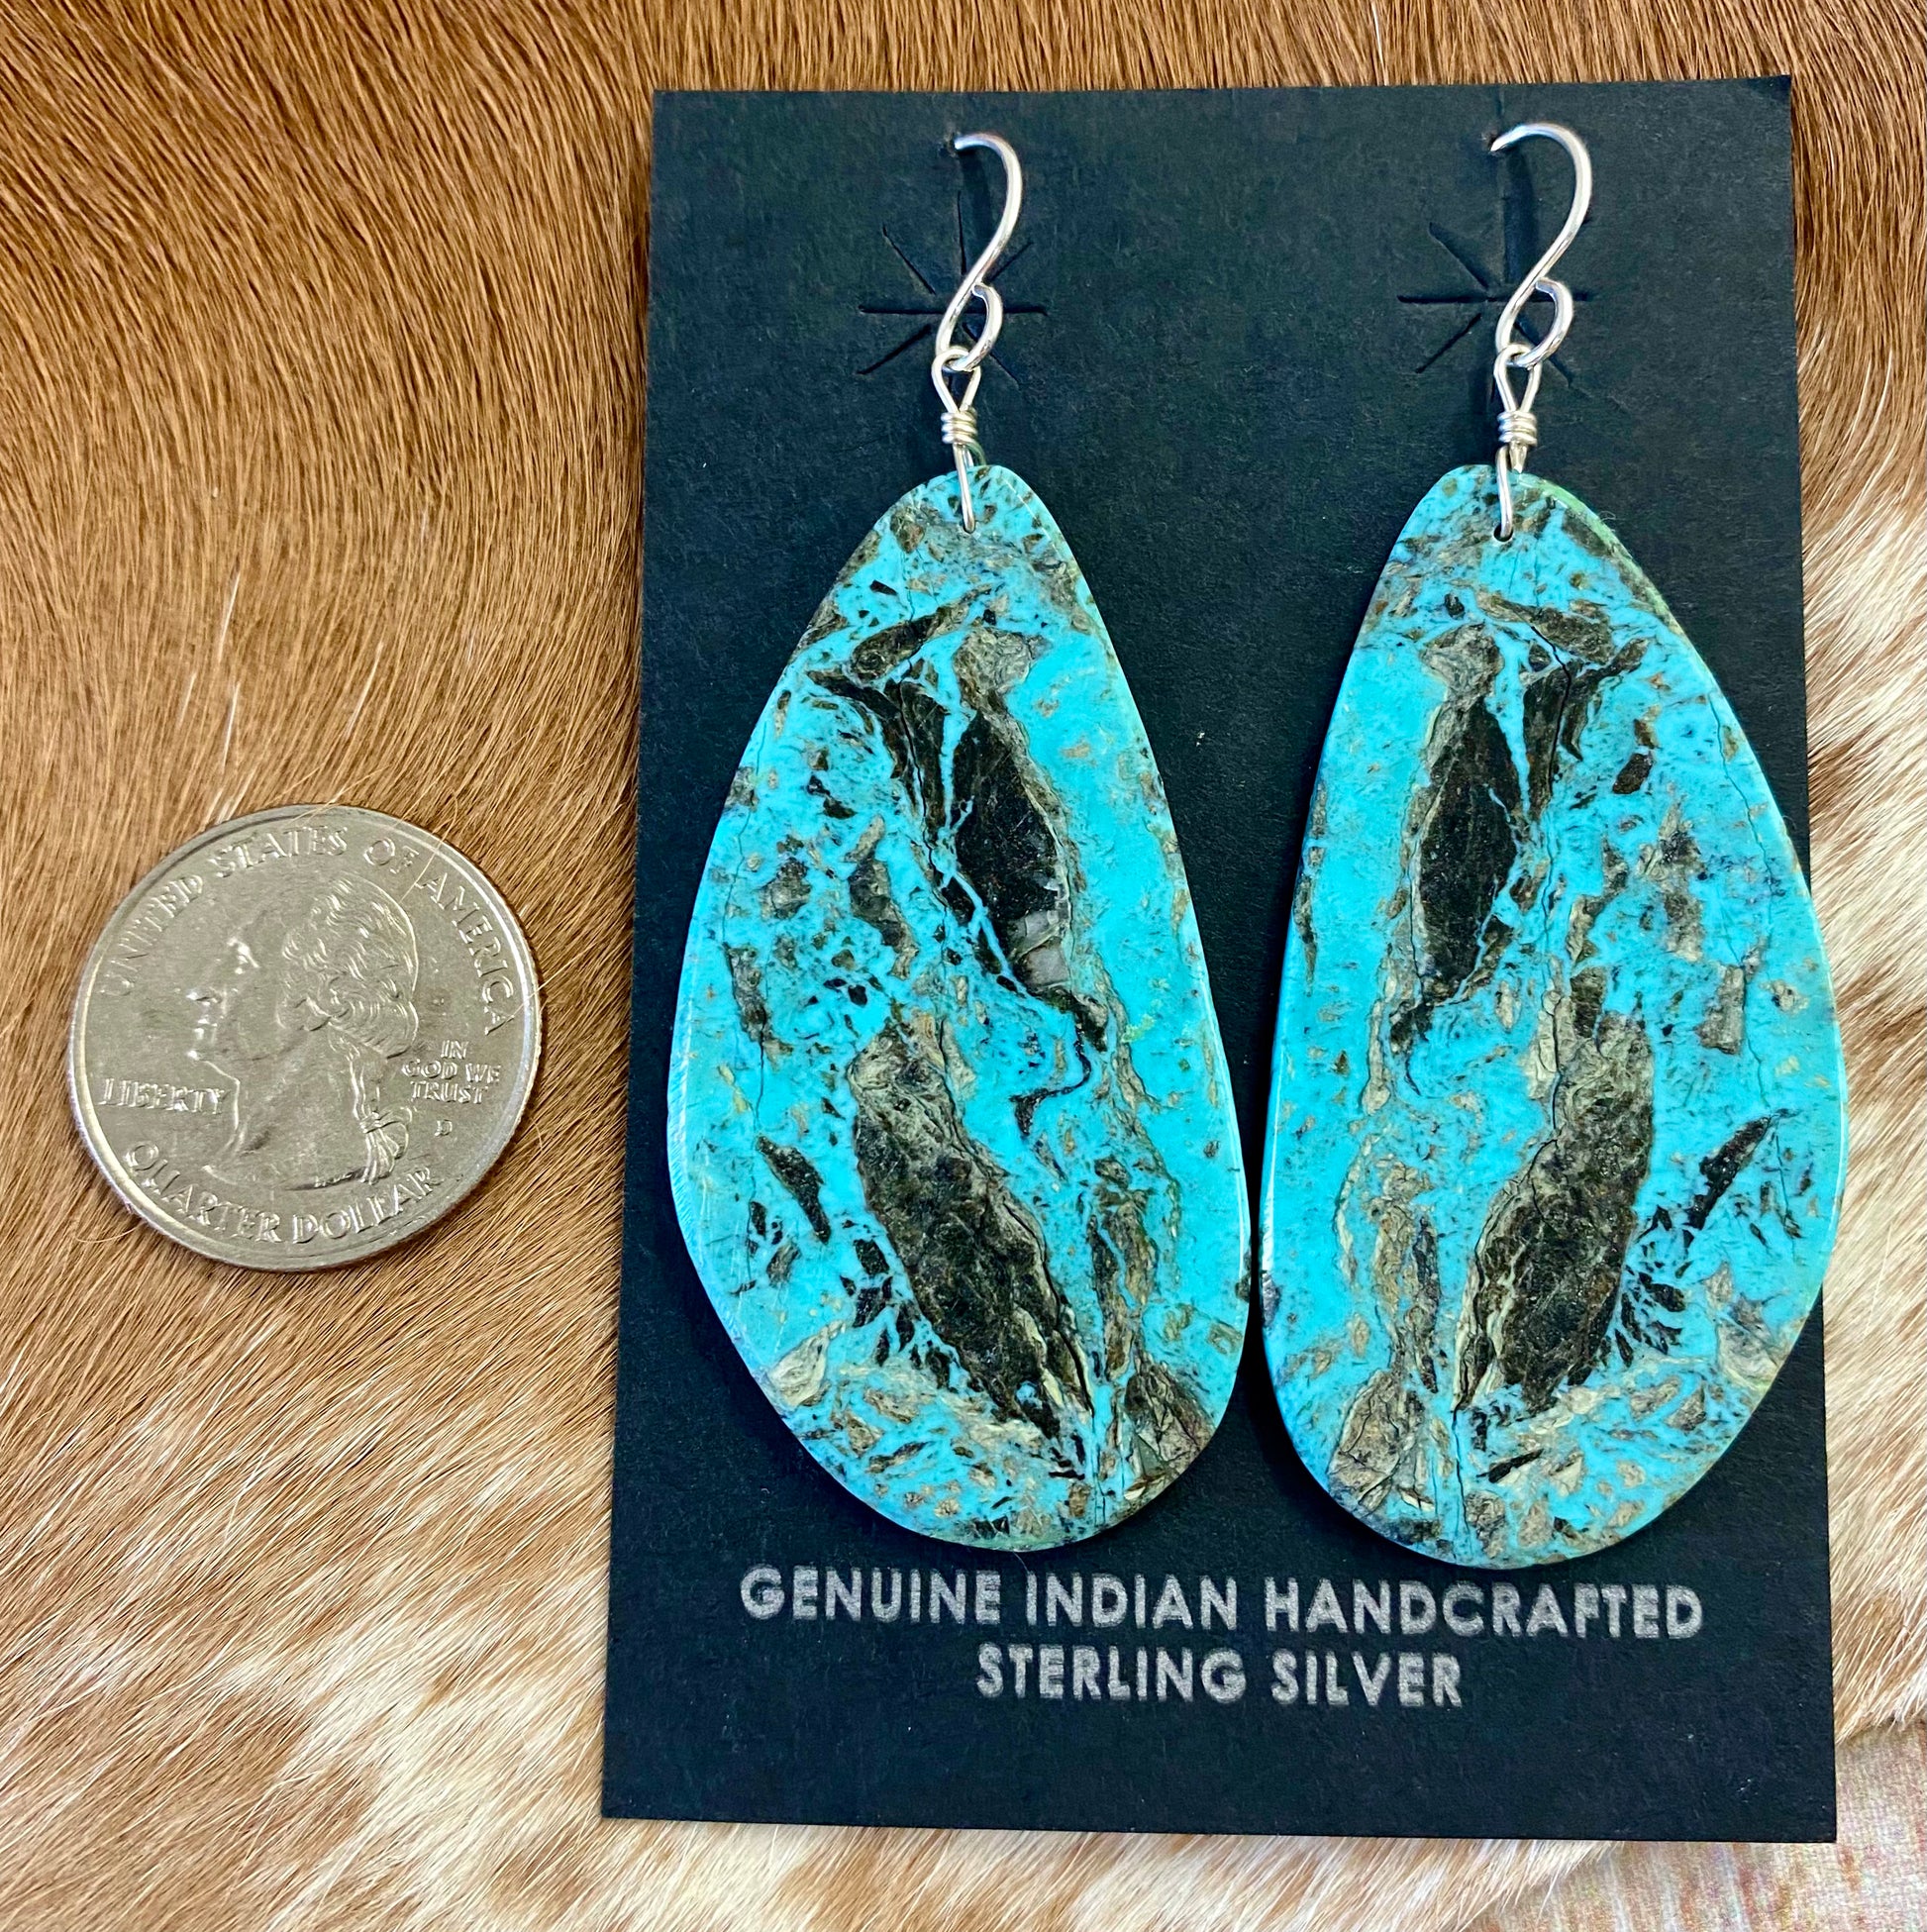 Large statement sterling silver handmade Native American made turquoise slab earrings. These are gorgeous and will make a statement with any outfit, any jewelry collection! These are made by Native American artist silversmith Ron Chavez.   Size: 2” inch length   Artist/Hallmark: Ron Chavez   Stone: Turquoise 